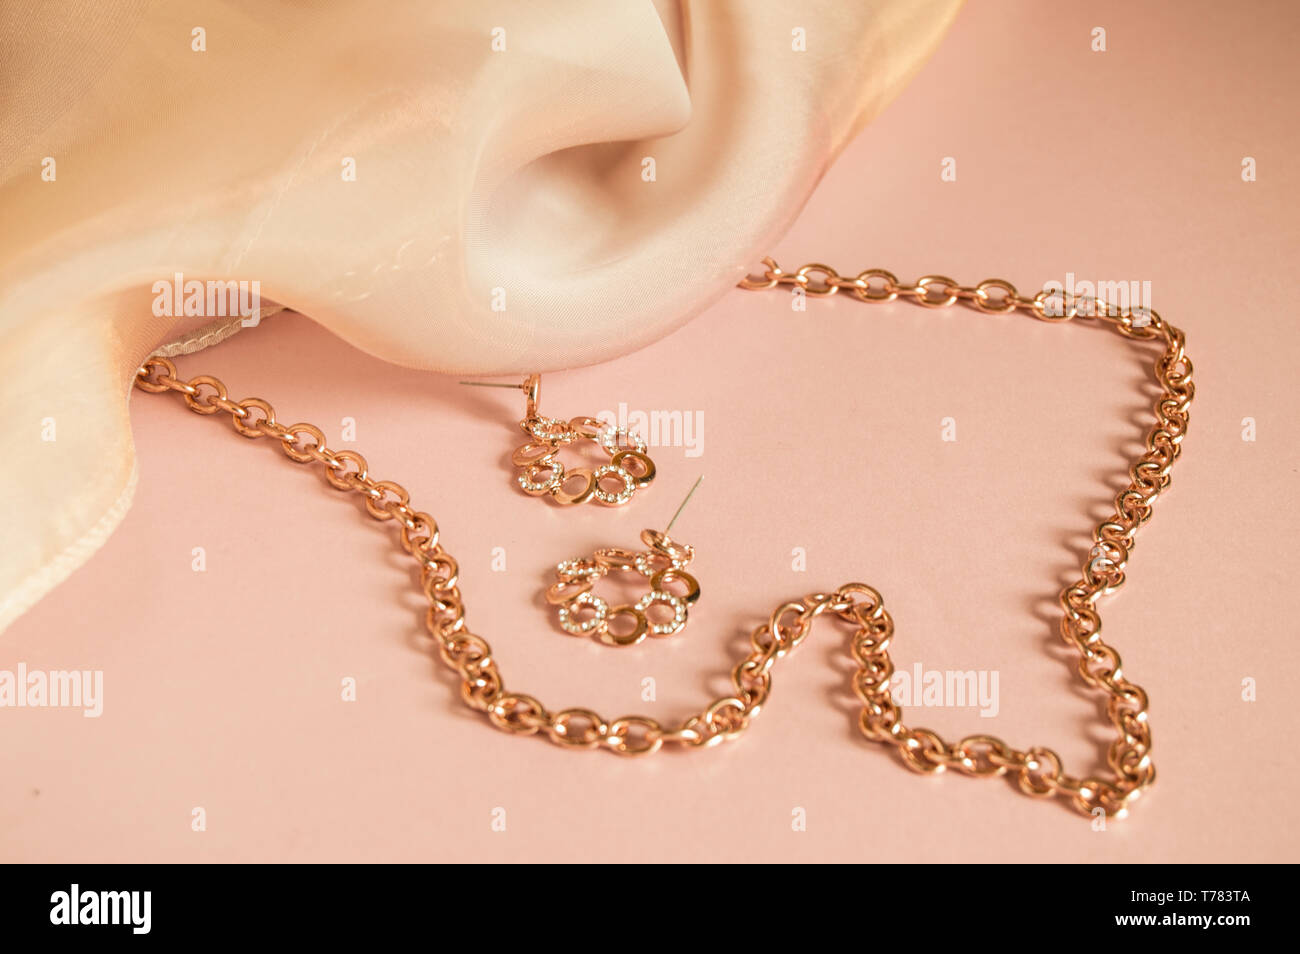 luxury gold jewelry chain and earrings on pink background with silk copy space selective focus stock photo alamy https www alamy com luxury gold jewelry chain and earrings on pink background with silk copy space selective focus image245426394 html